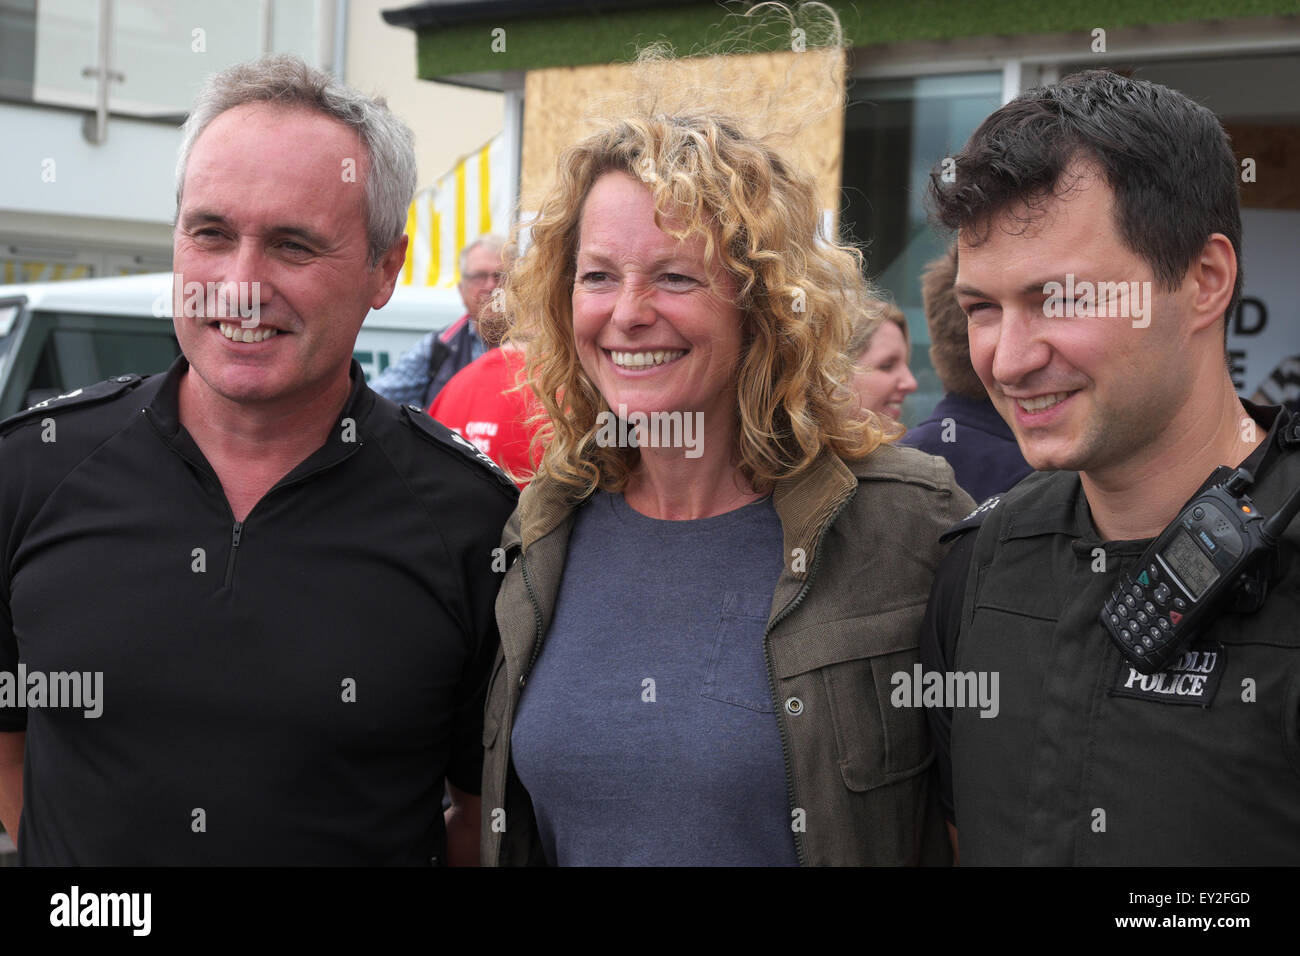 Royal Welsh Show, Builth Wells, Powys, UK July 2015. Photo shows TV celebrity and smallholder farmer Kate Humble posing with two local police officers at the show. Stock Photo